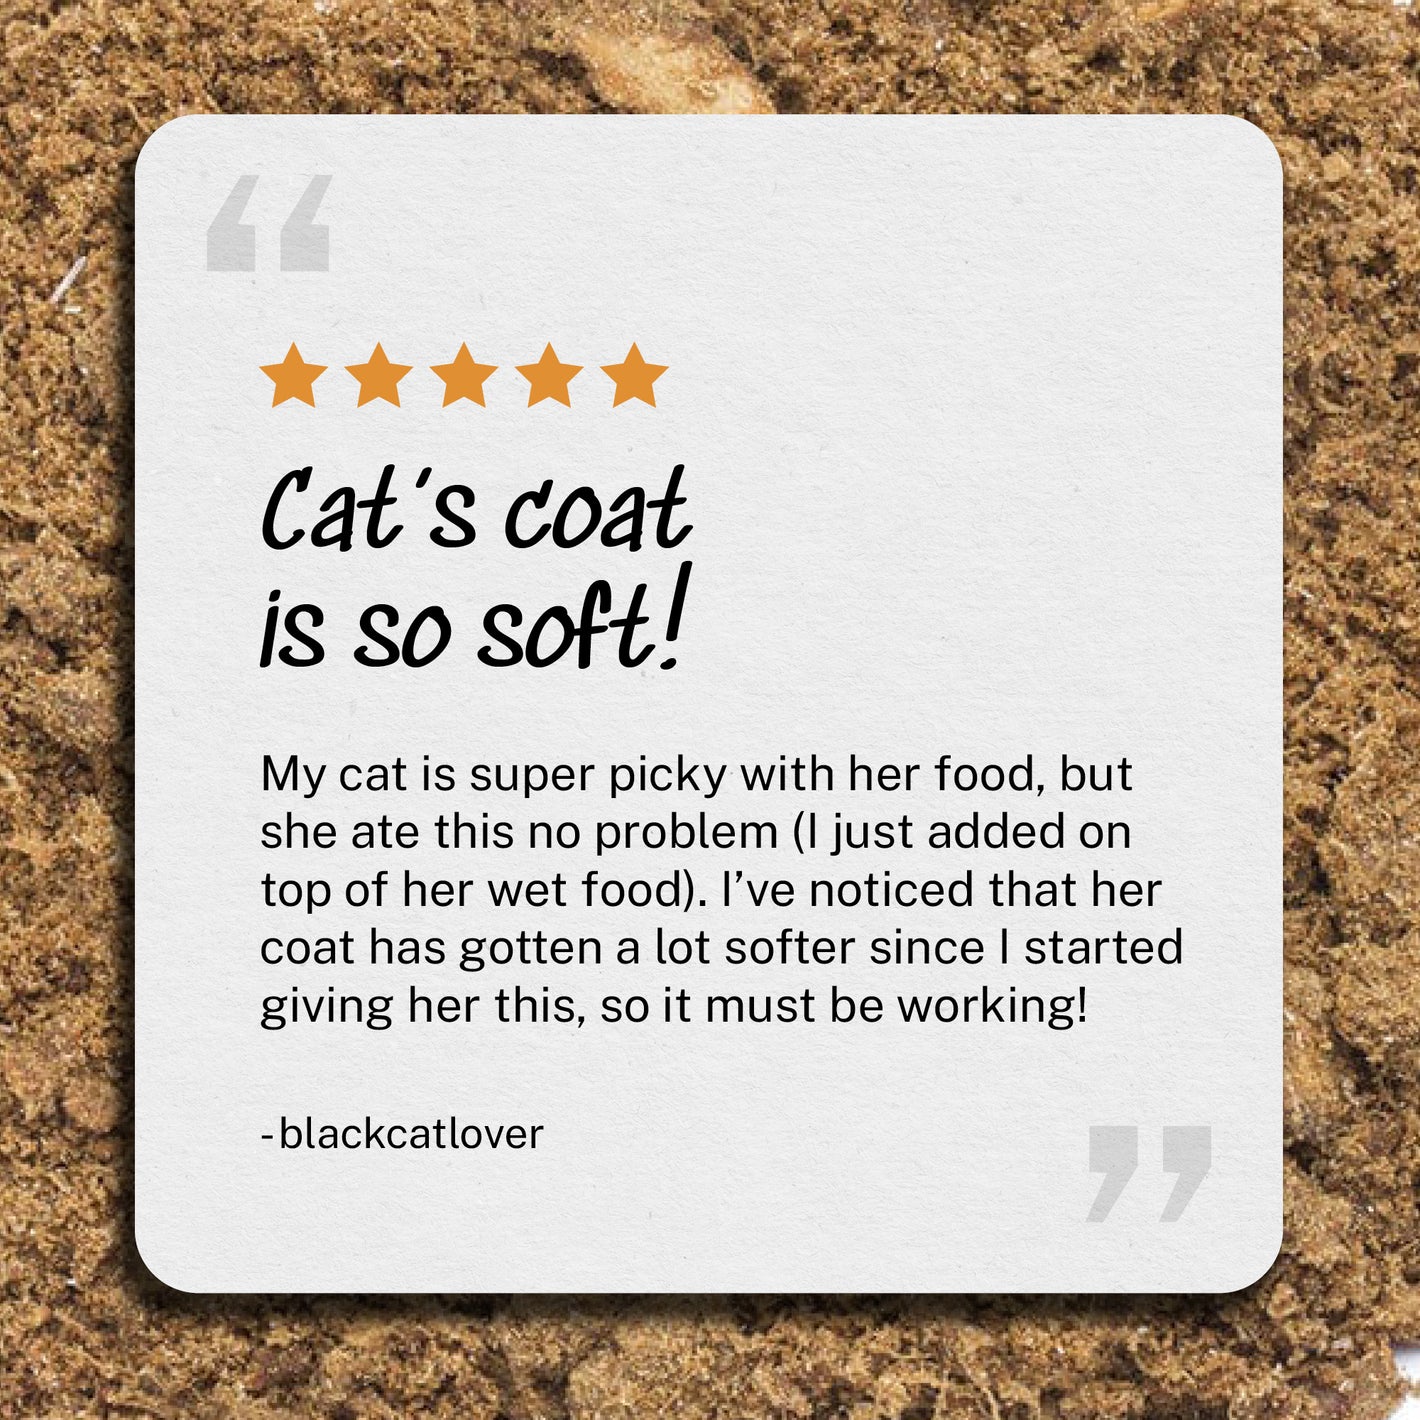 Cat's coat is so soft! My cat is super picky with her food, but she ate this no problem (I just added on top of her wet food). I’ve noticed that her coat has gotten a lot softer since I started giving her this, so it must be working! -blackcatlover